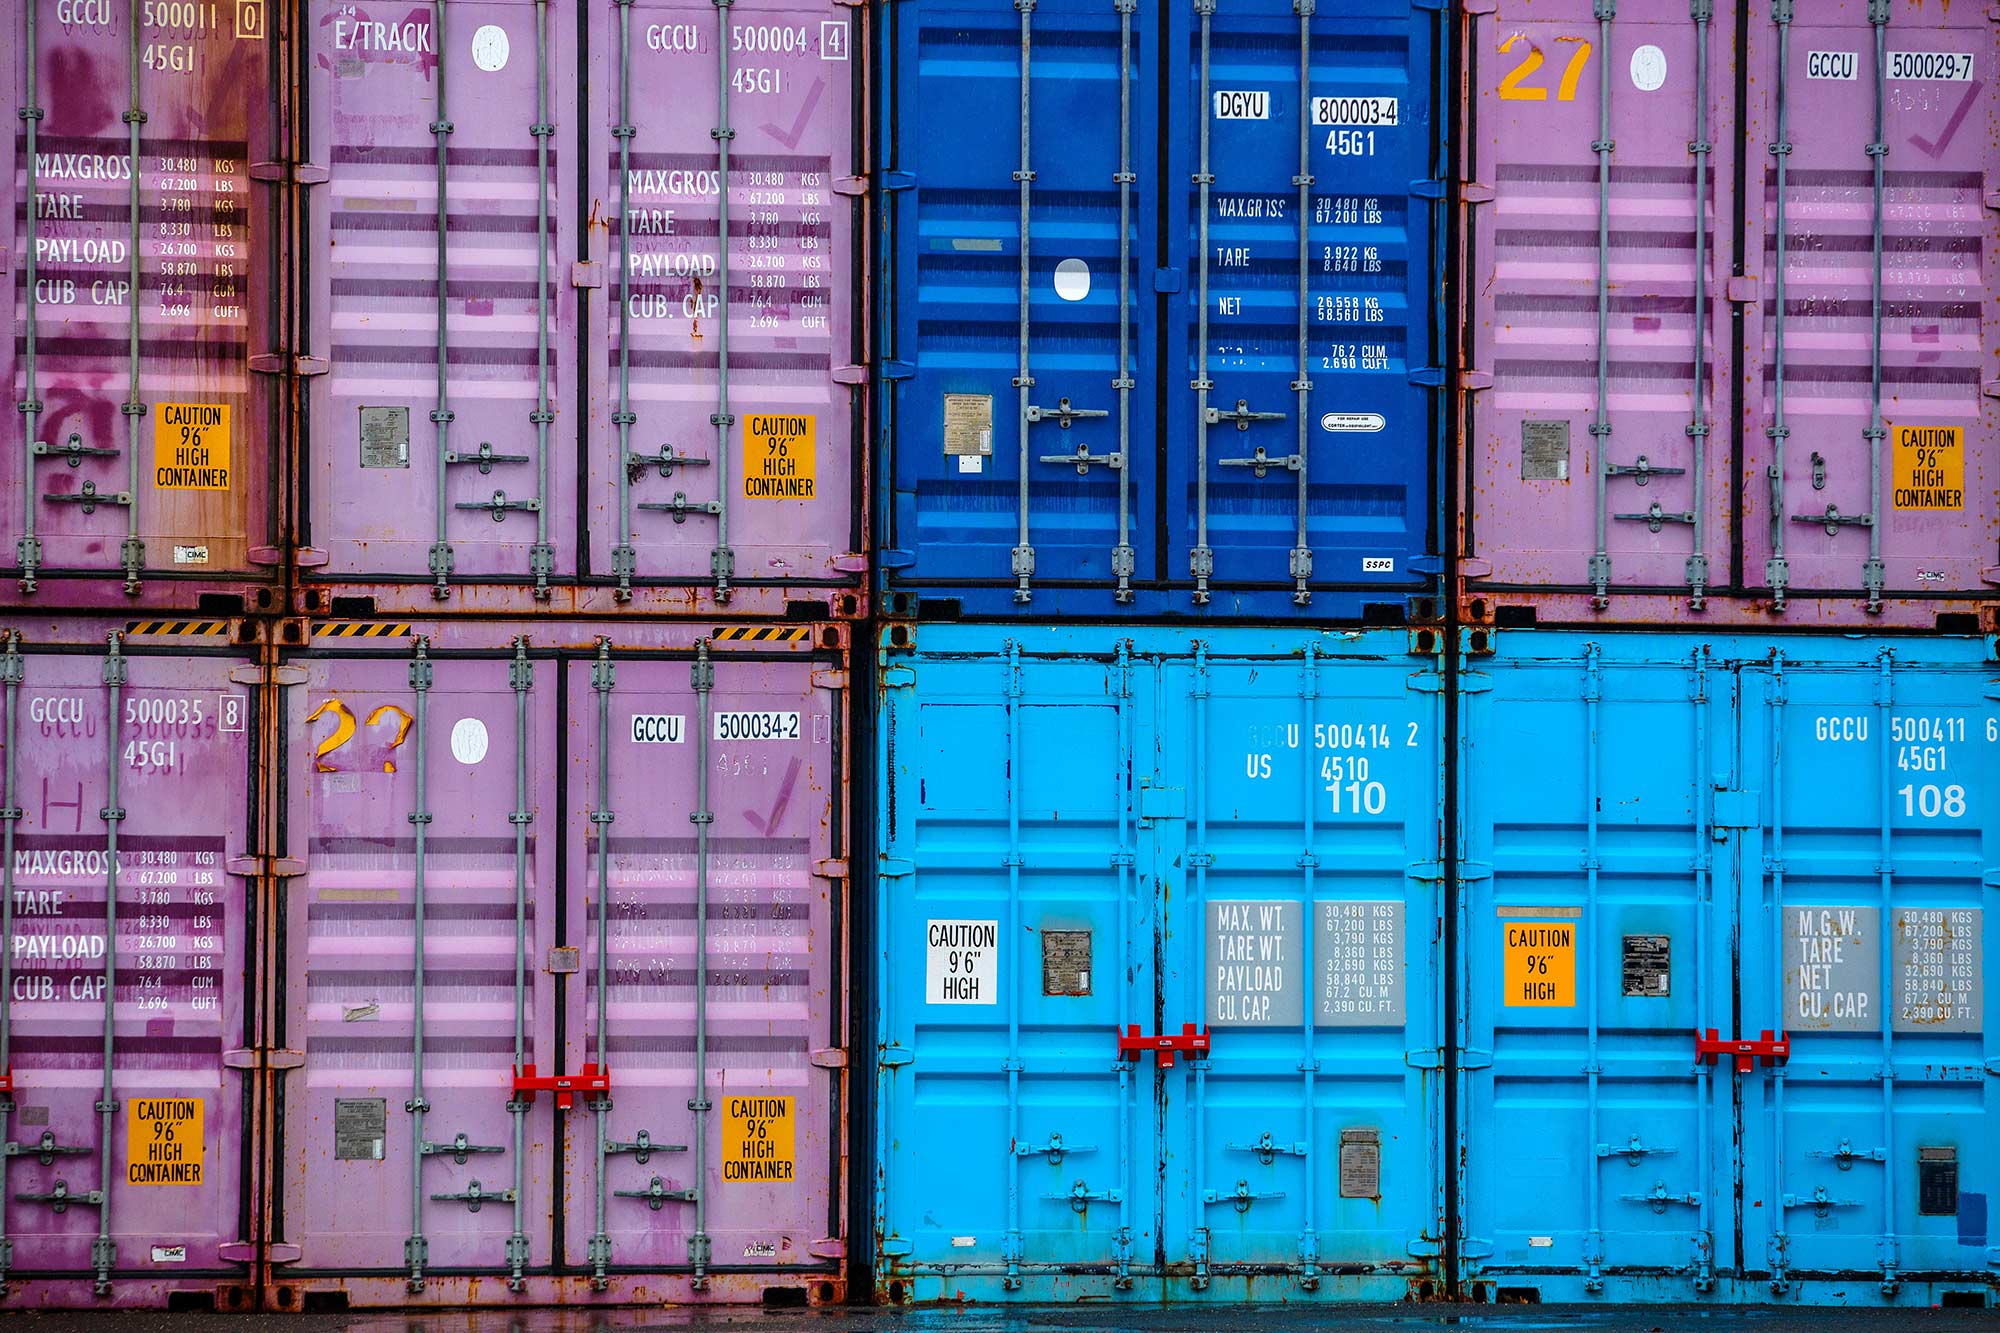 Containers, East Granby, CT - 4/7/15